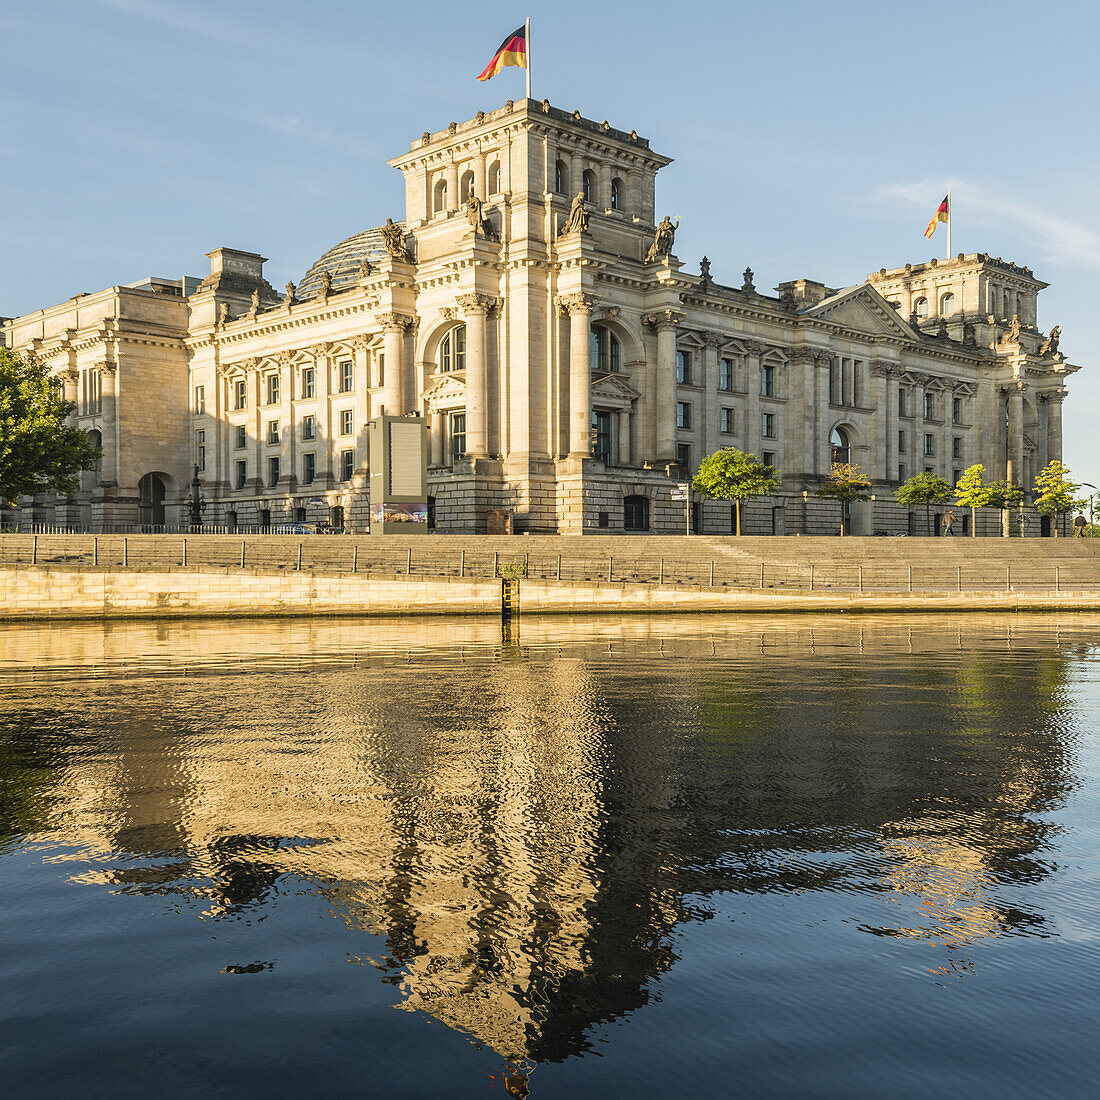 Reichstag and government buildings around river Spree in Berlin 